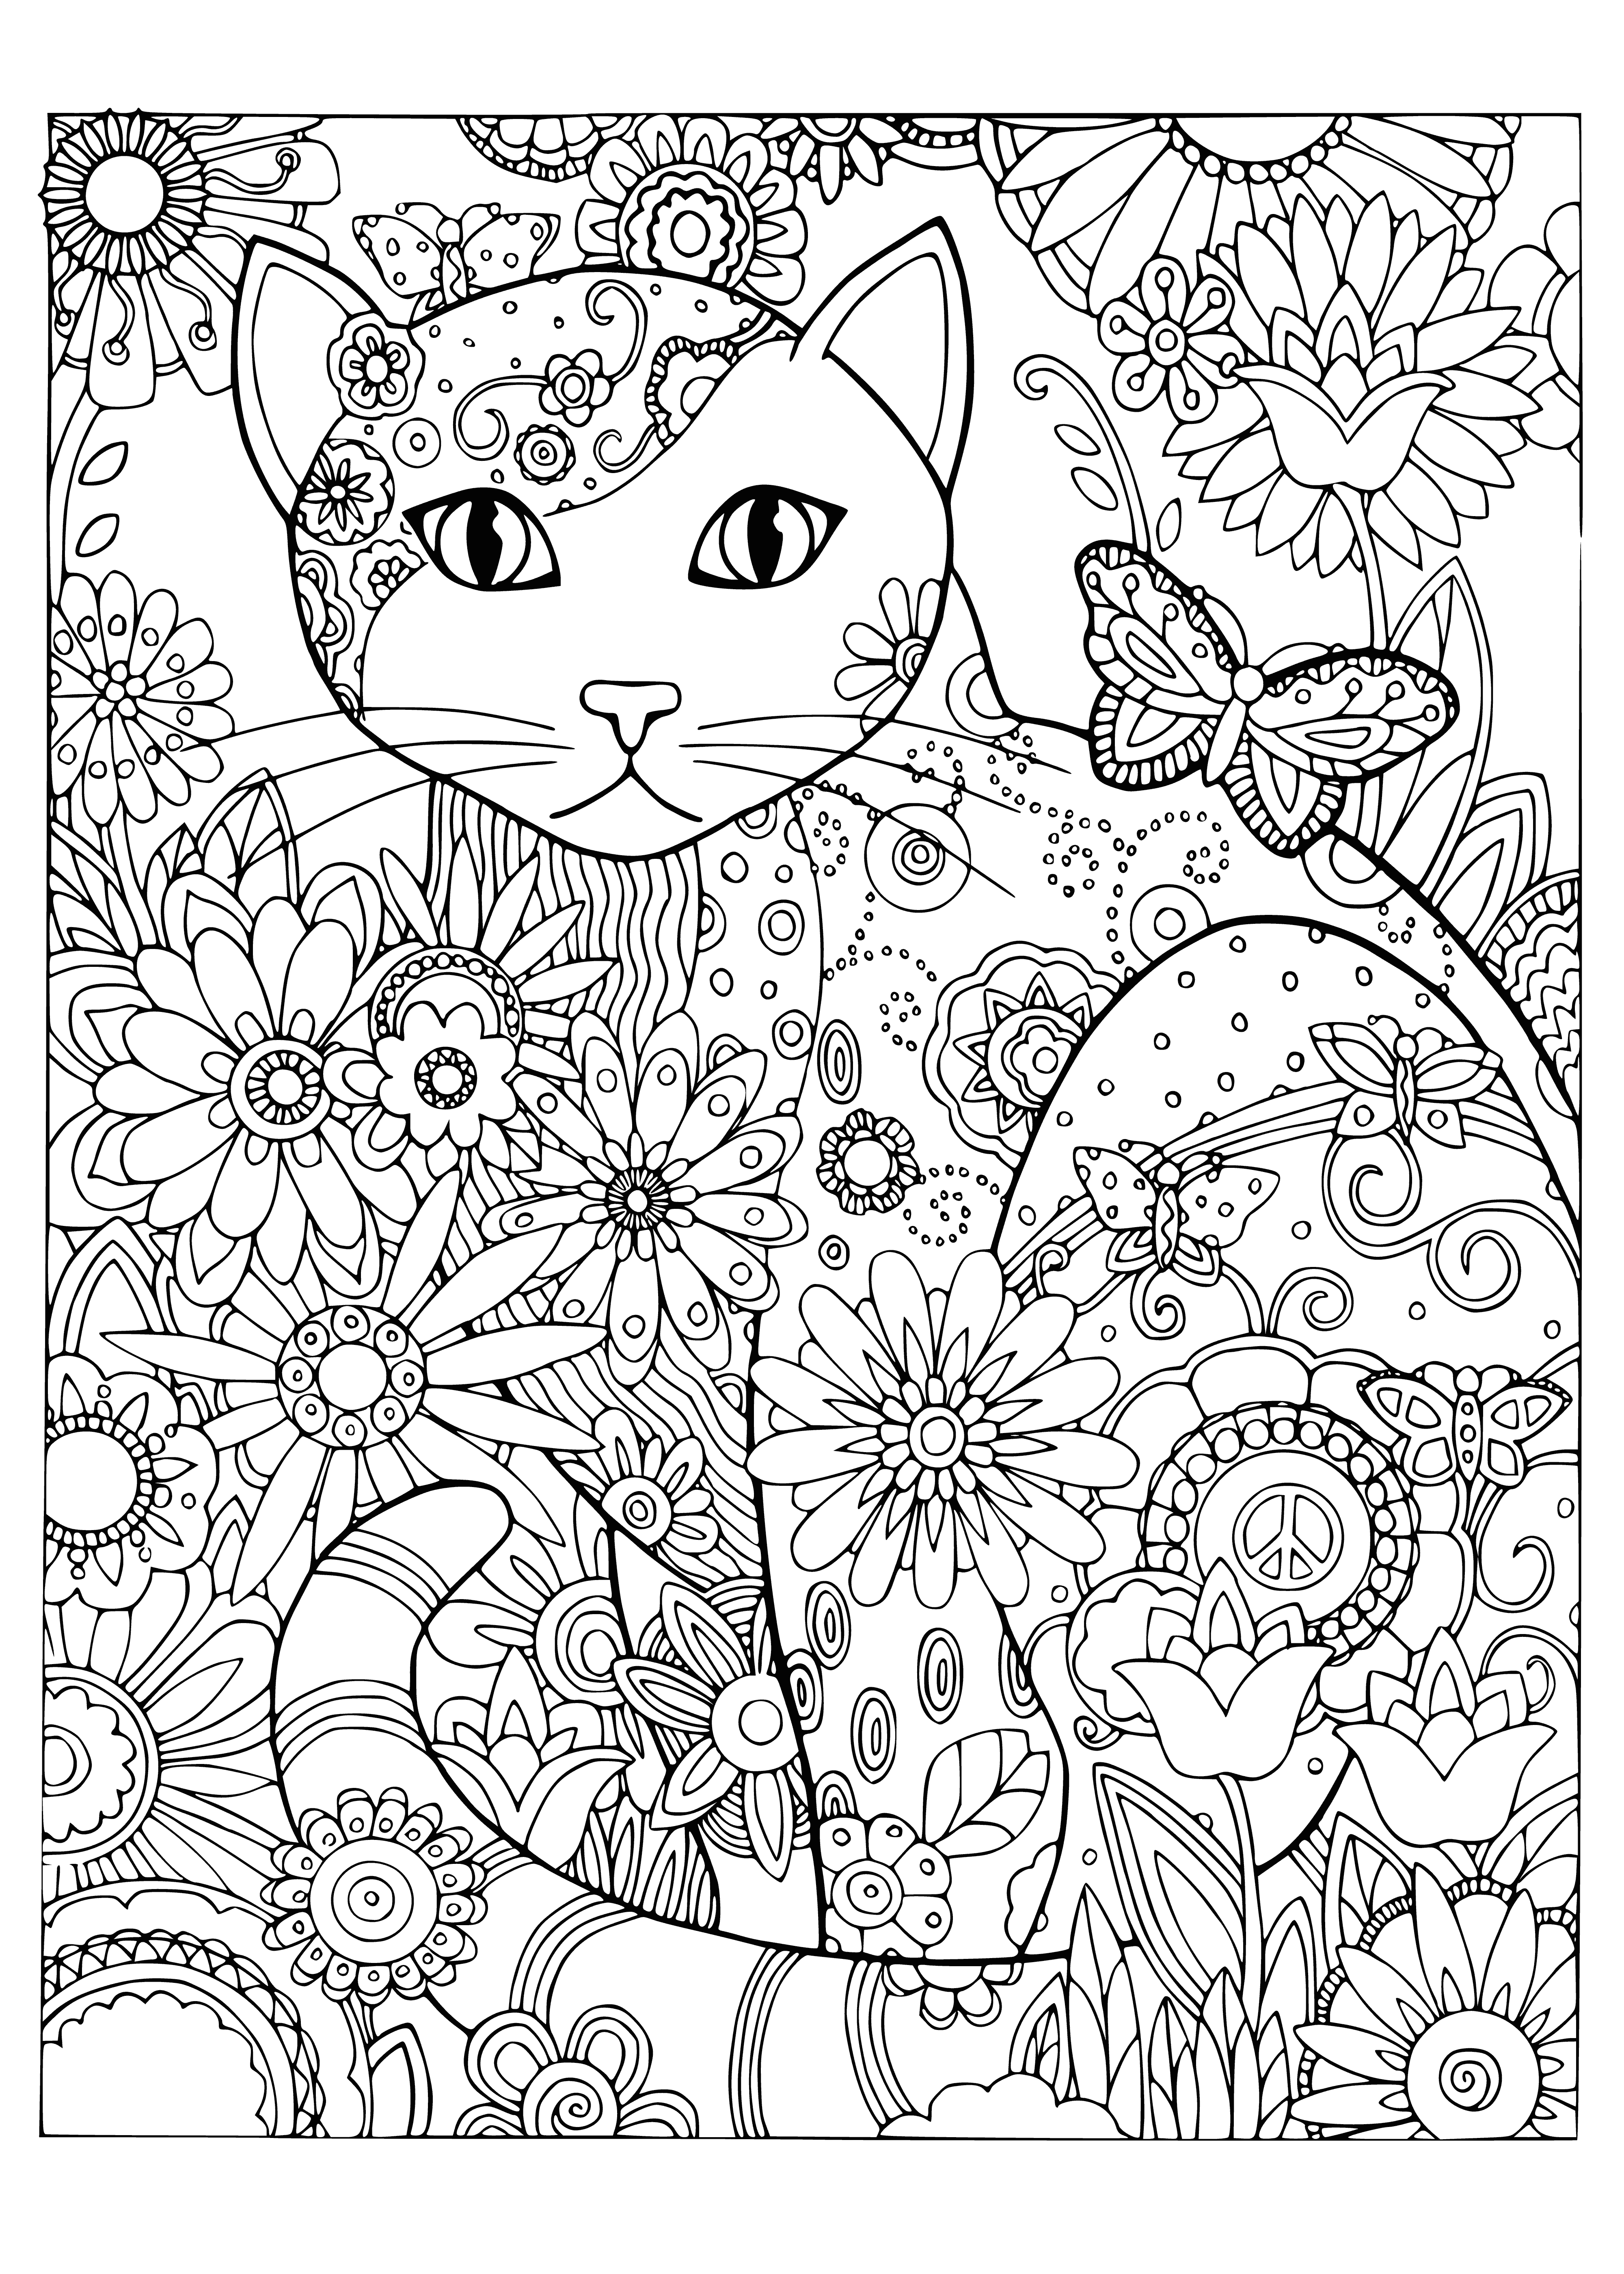 Cat in flowers coloring page